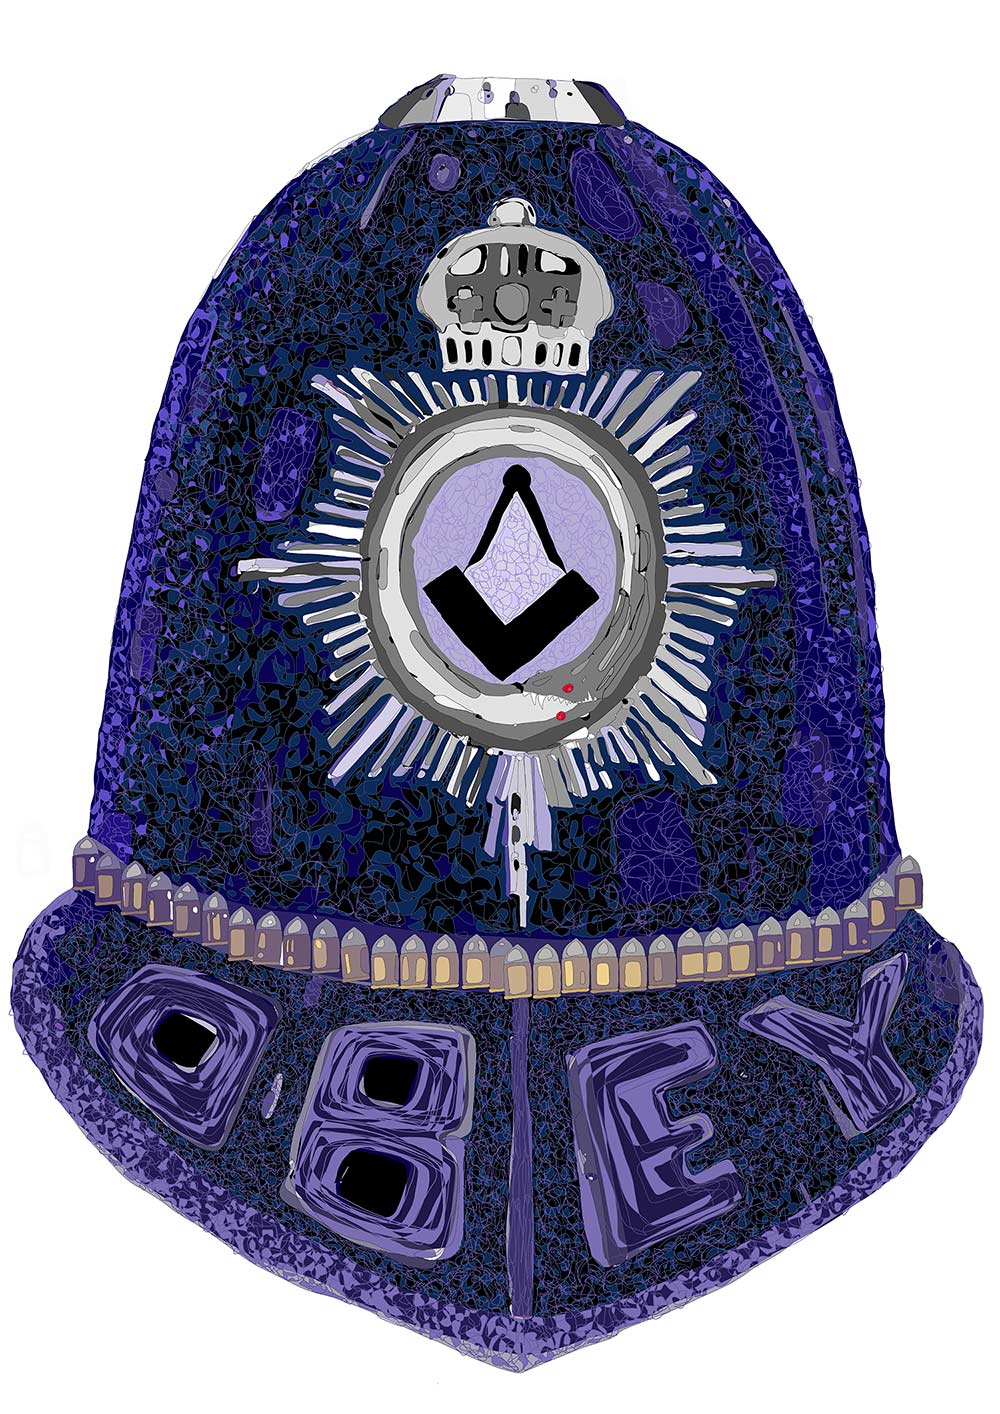 artwork of a traditional British police helmet with masonic insignia by Welsh artist Mark Lloyd Williams